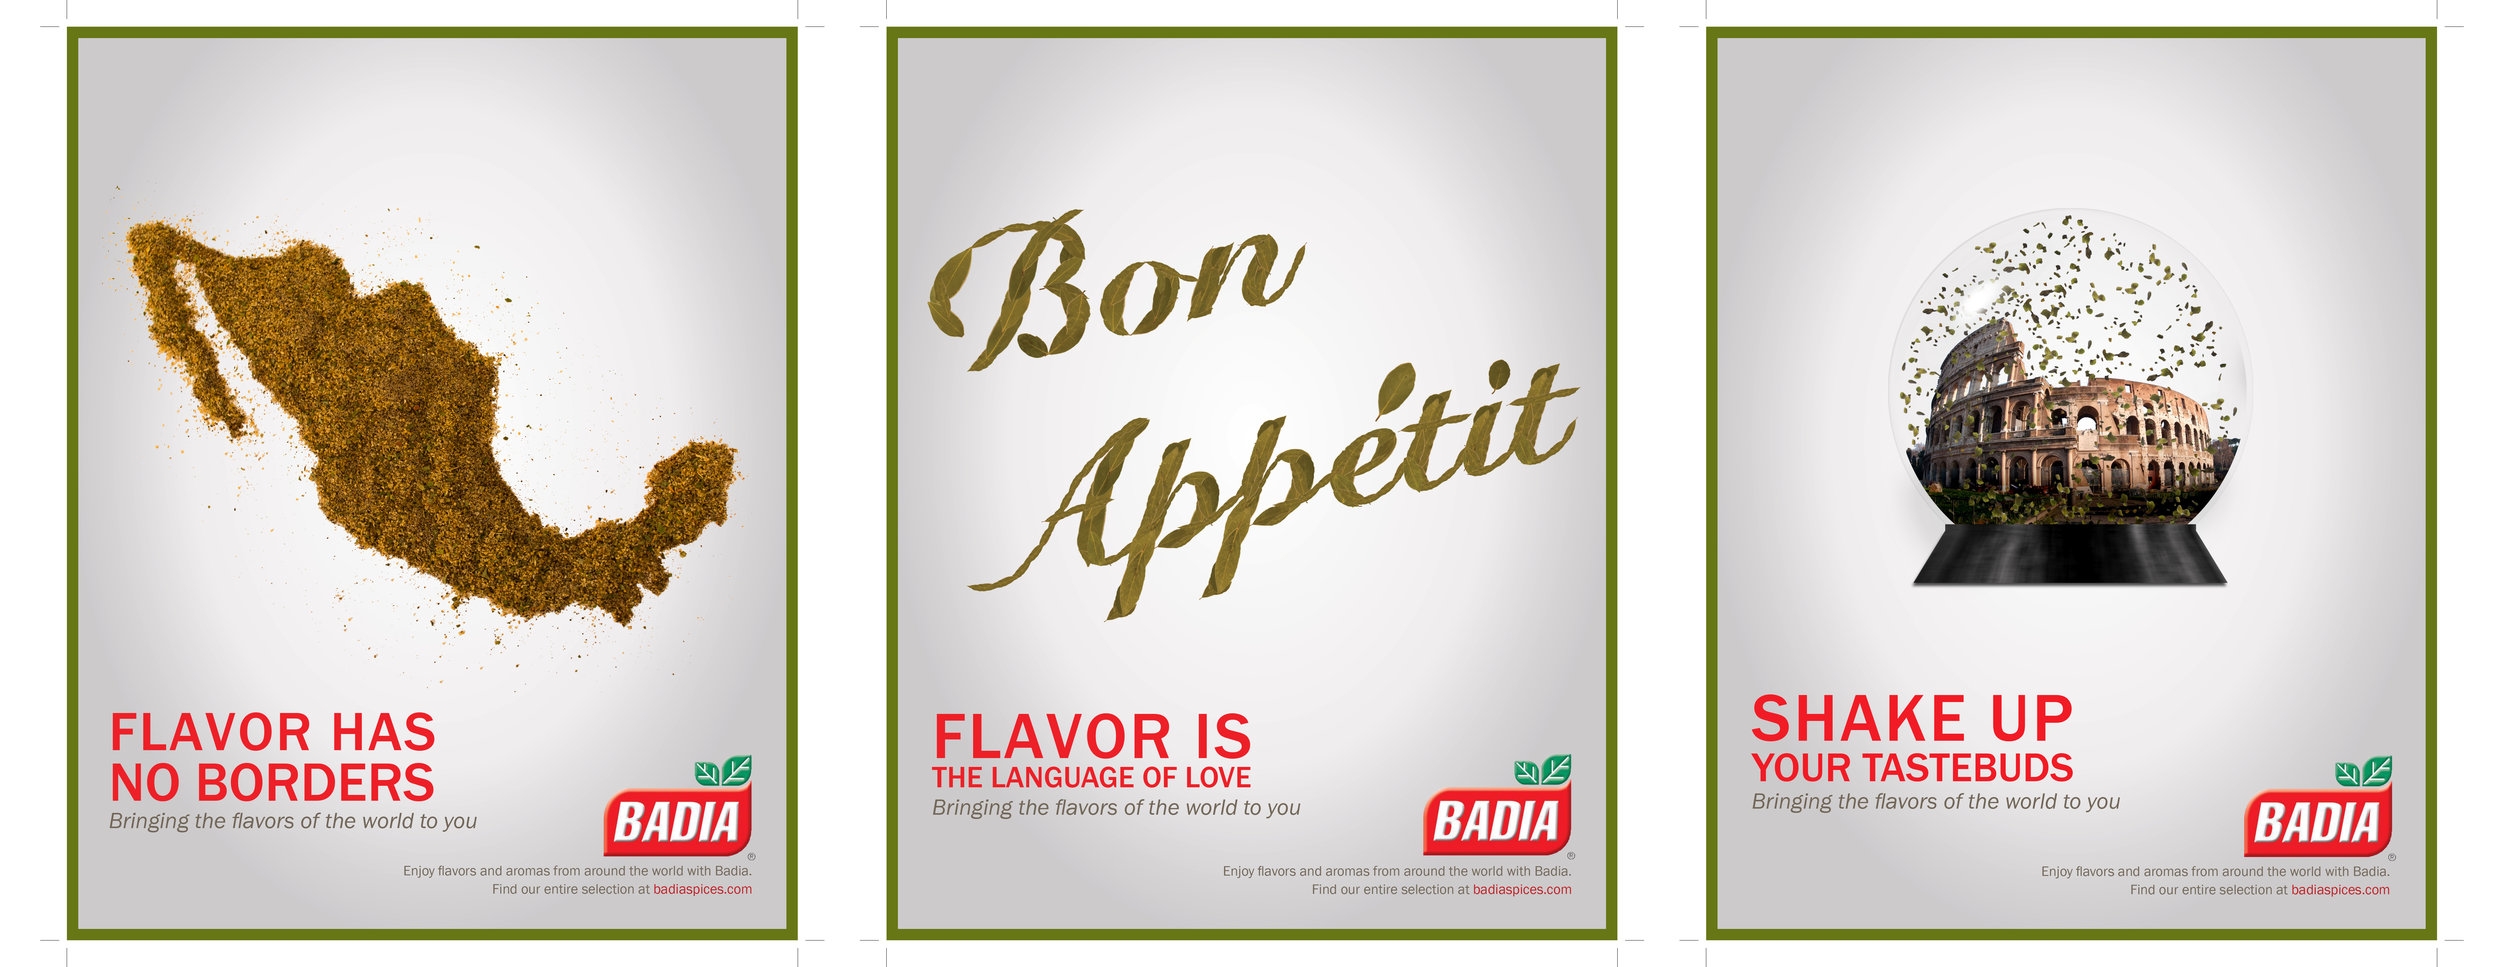 BADIA: Bringing the flavors of the World to you!